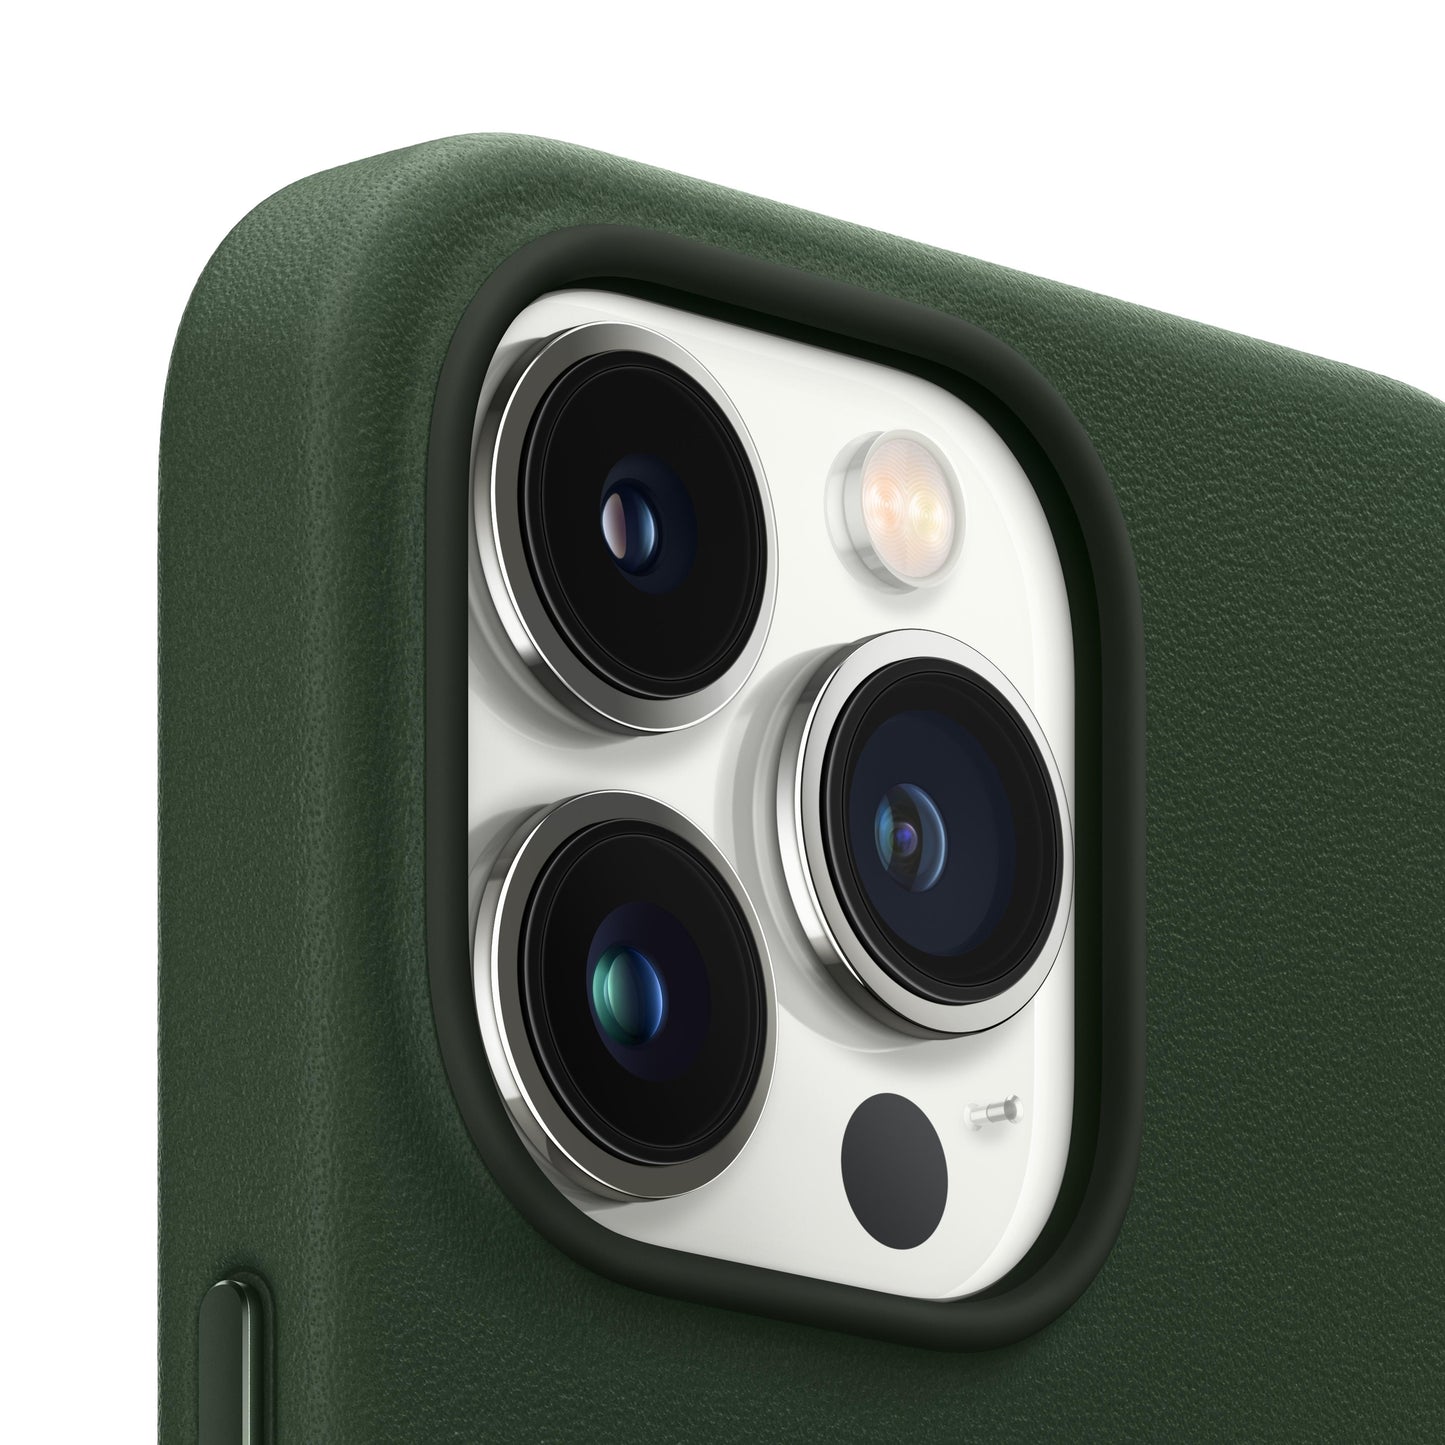 iPhone 13 Pro Leather Case with MagSafe - Sequoia Green